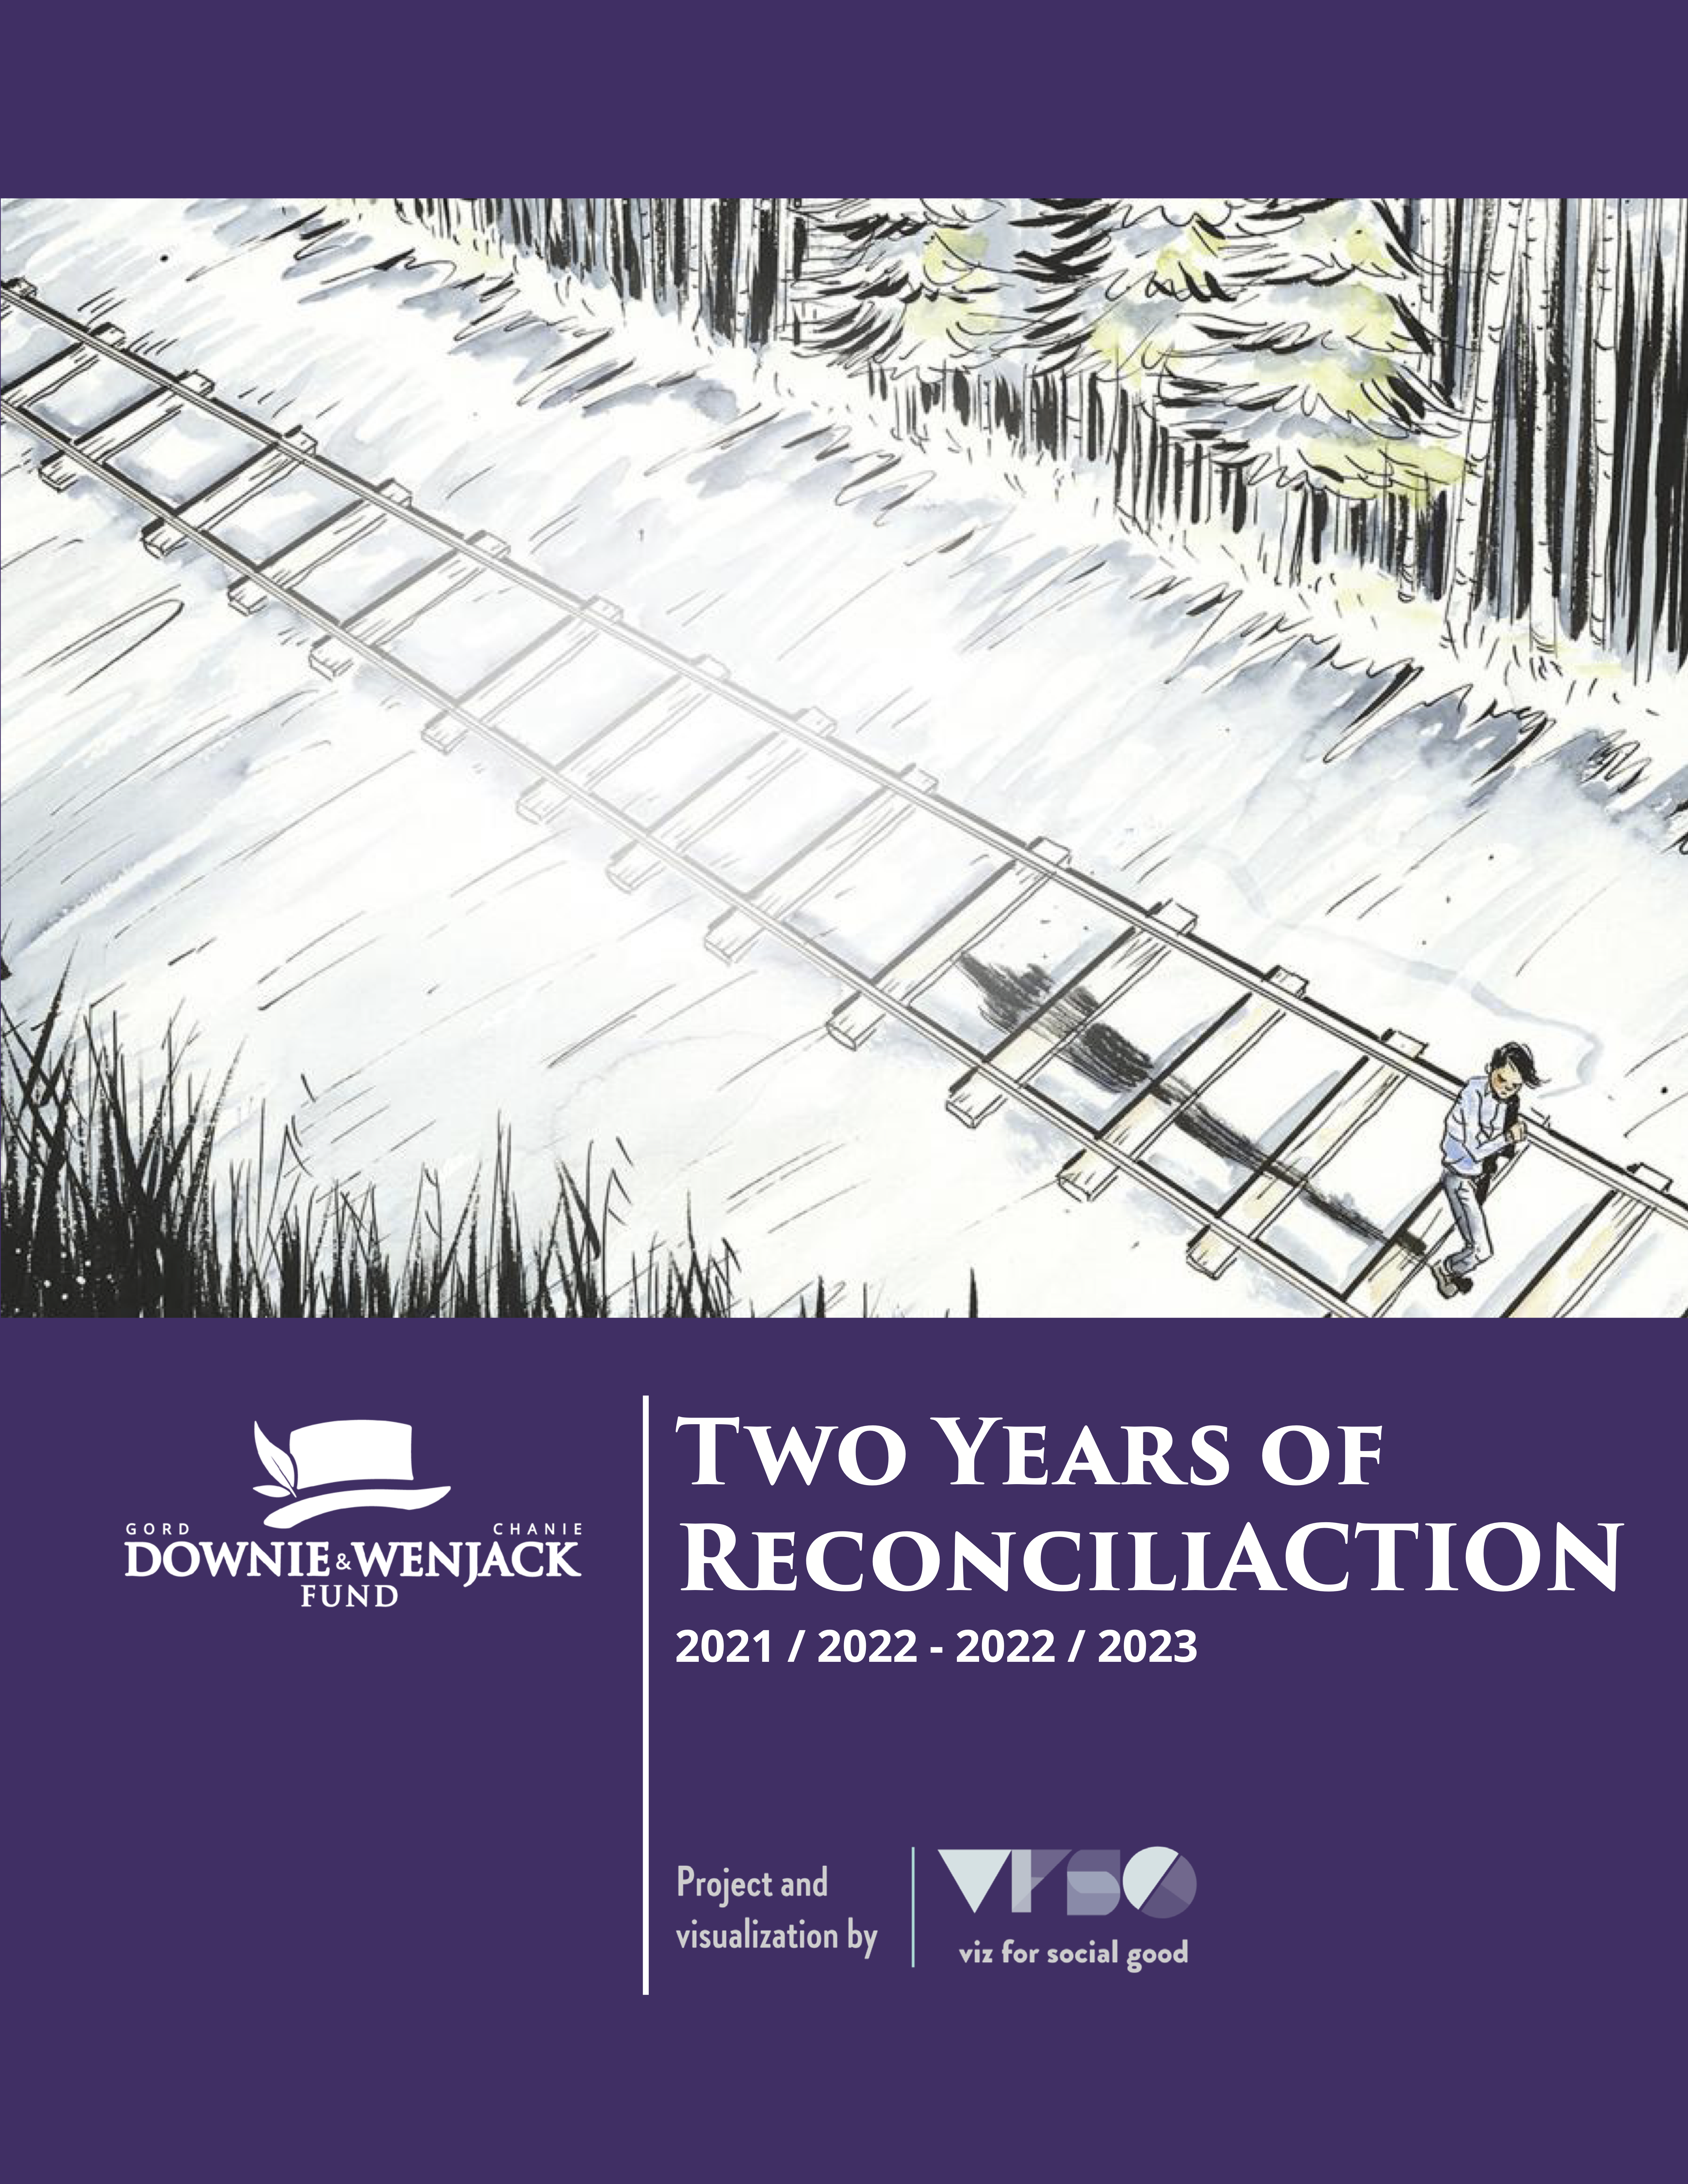 Cover page of my reconciliACTIONs report for DWF, with an image of a watercolour painting of Chanie Wenjack walking along a railway track. The report title is 'Two Years of reconciliACTION'